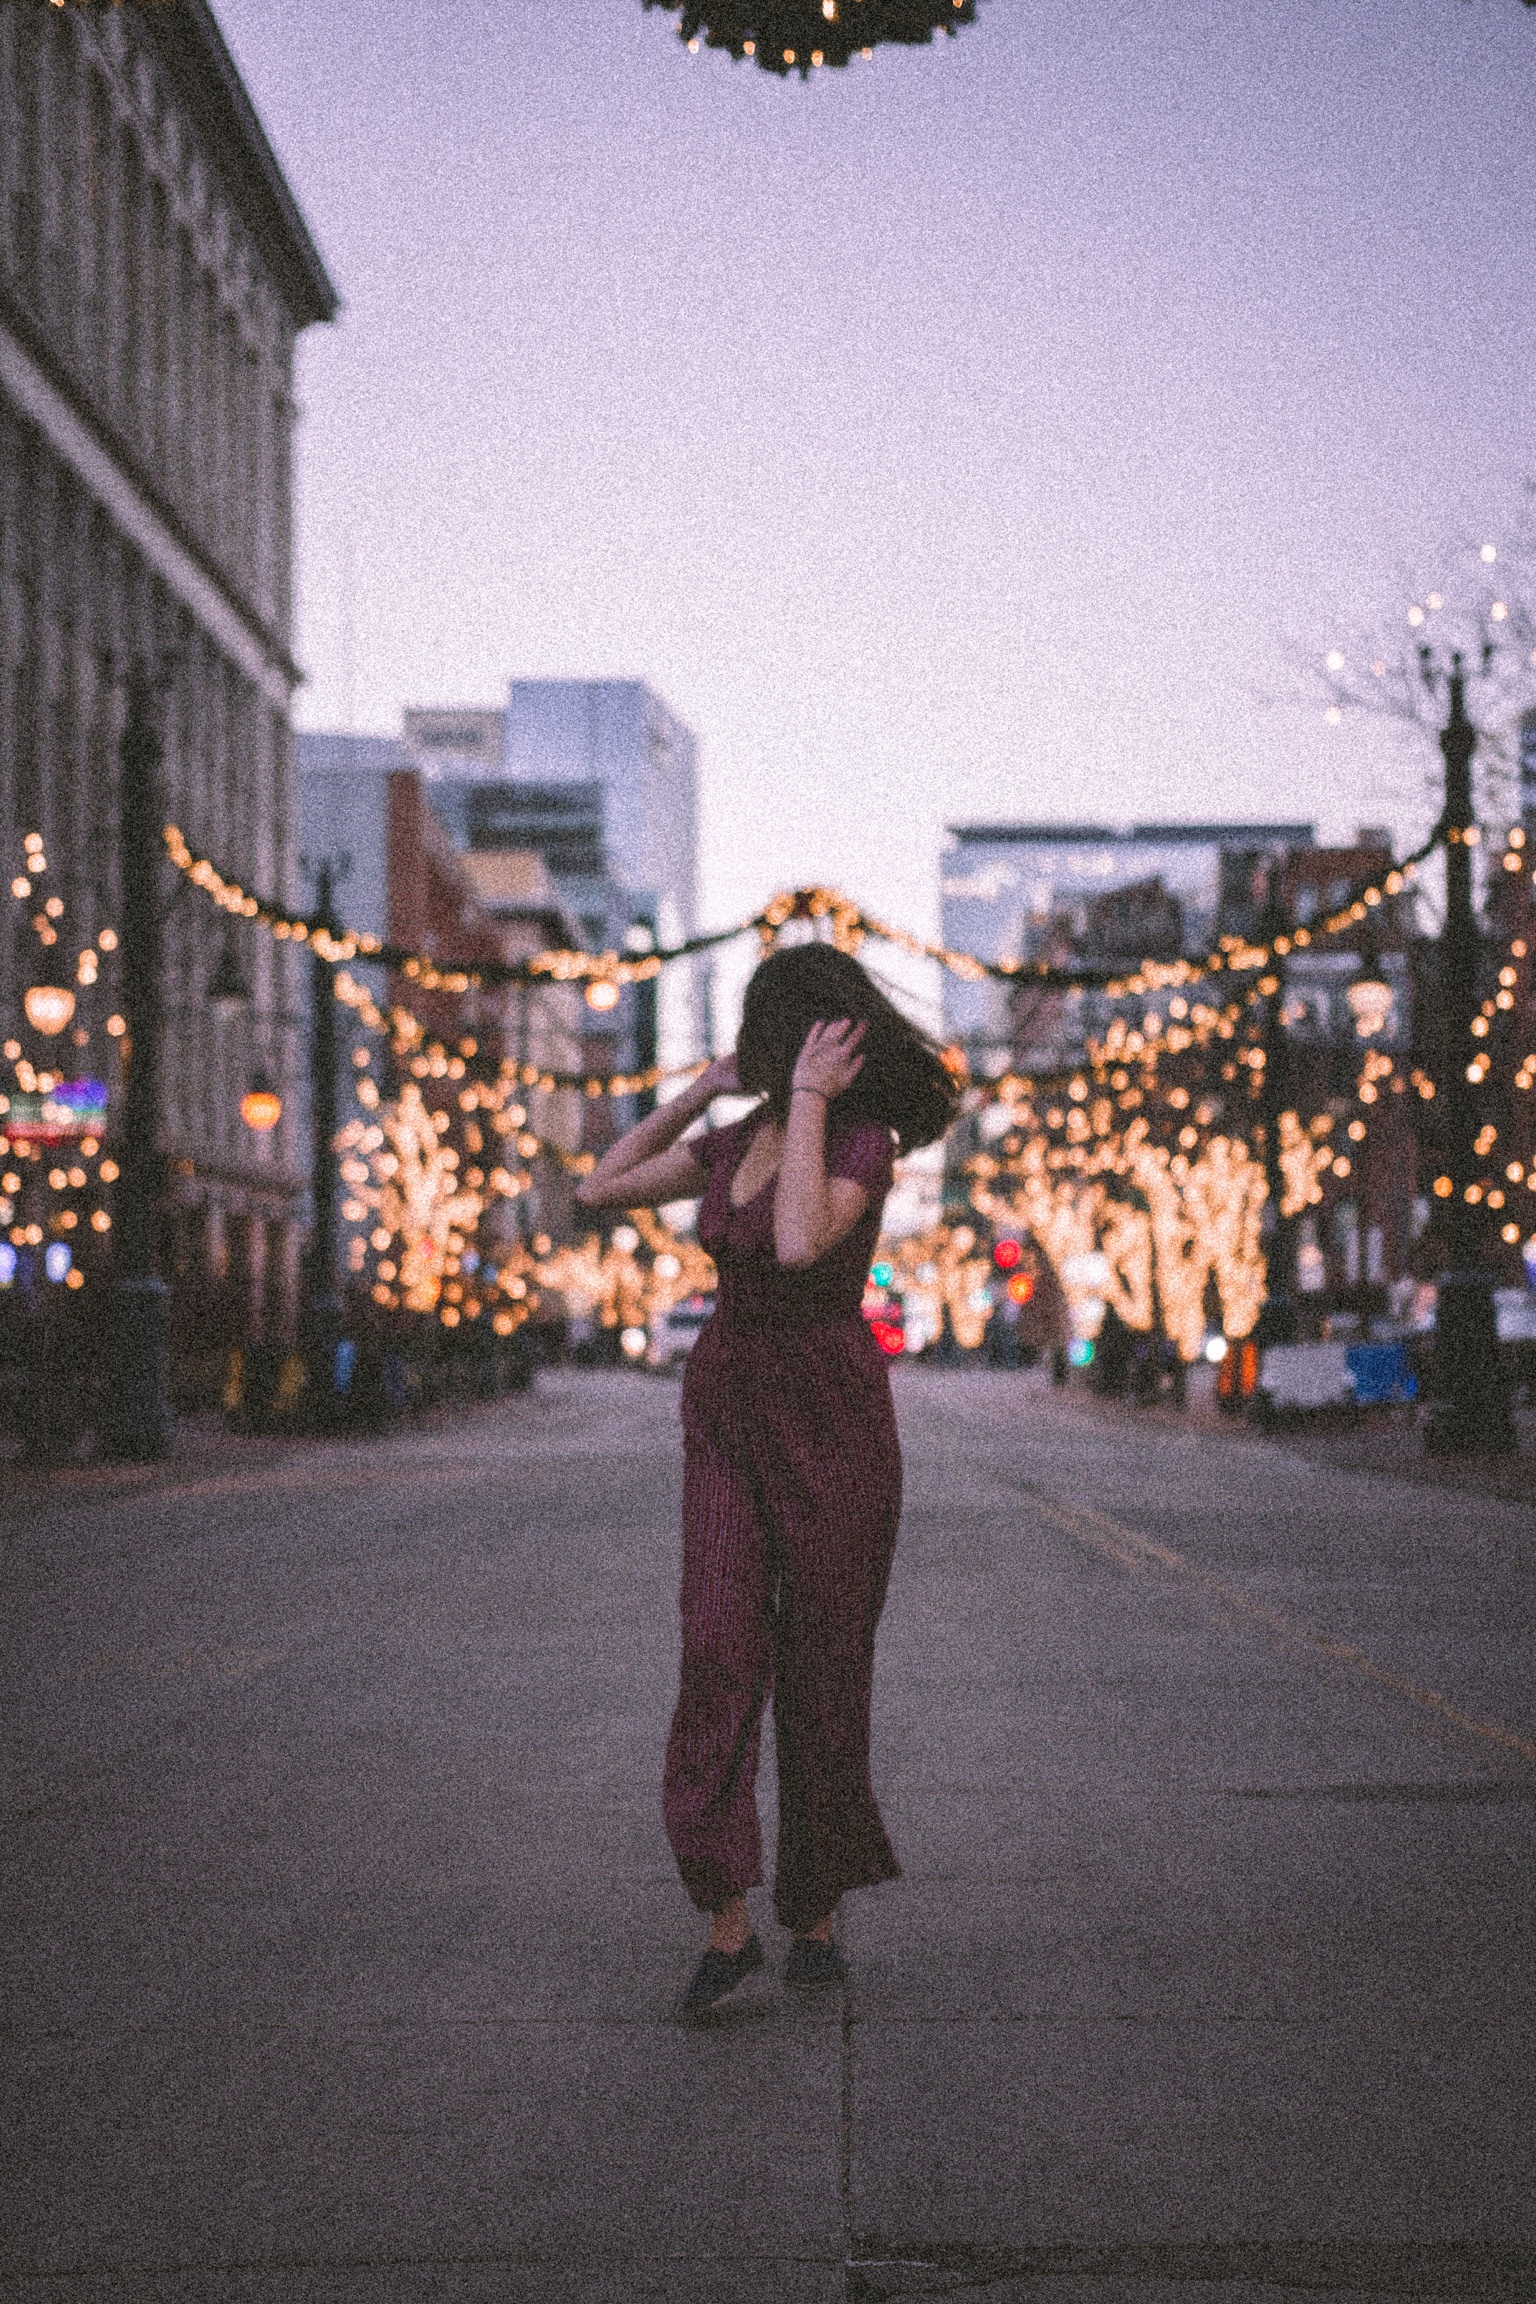 A young woman walks down the middle of a street at dusk. She looks behind her shoulder at holiday lights that adorn the street lamps and trees. 